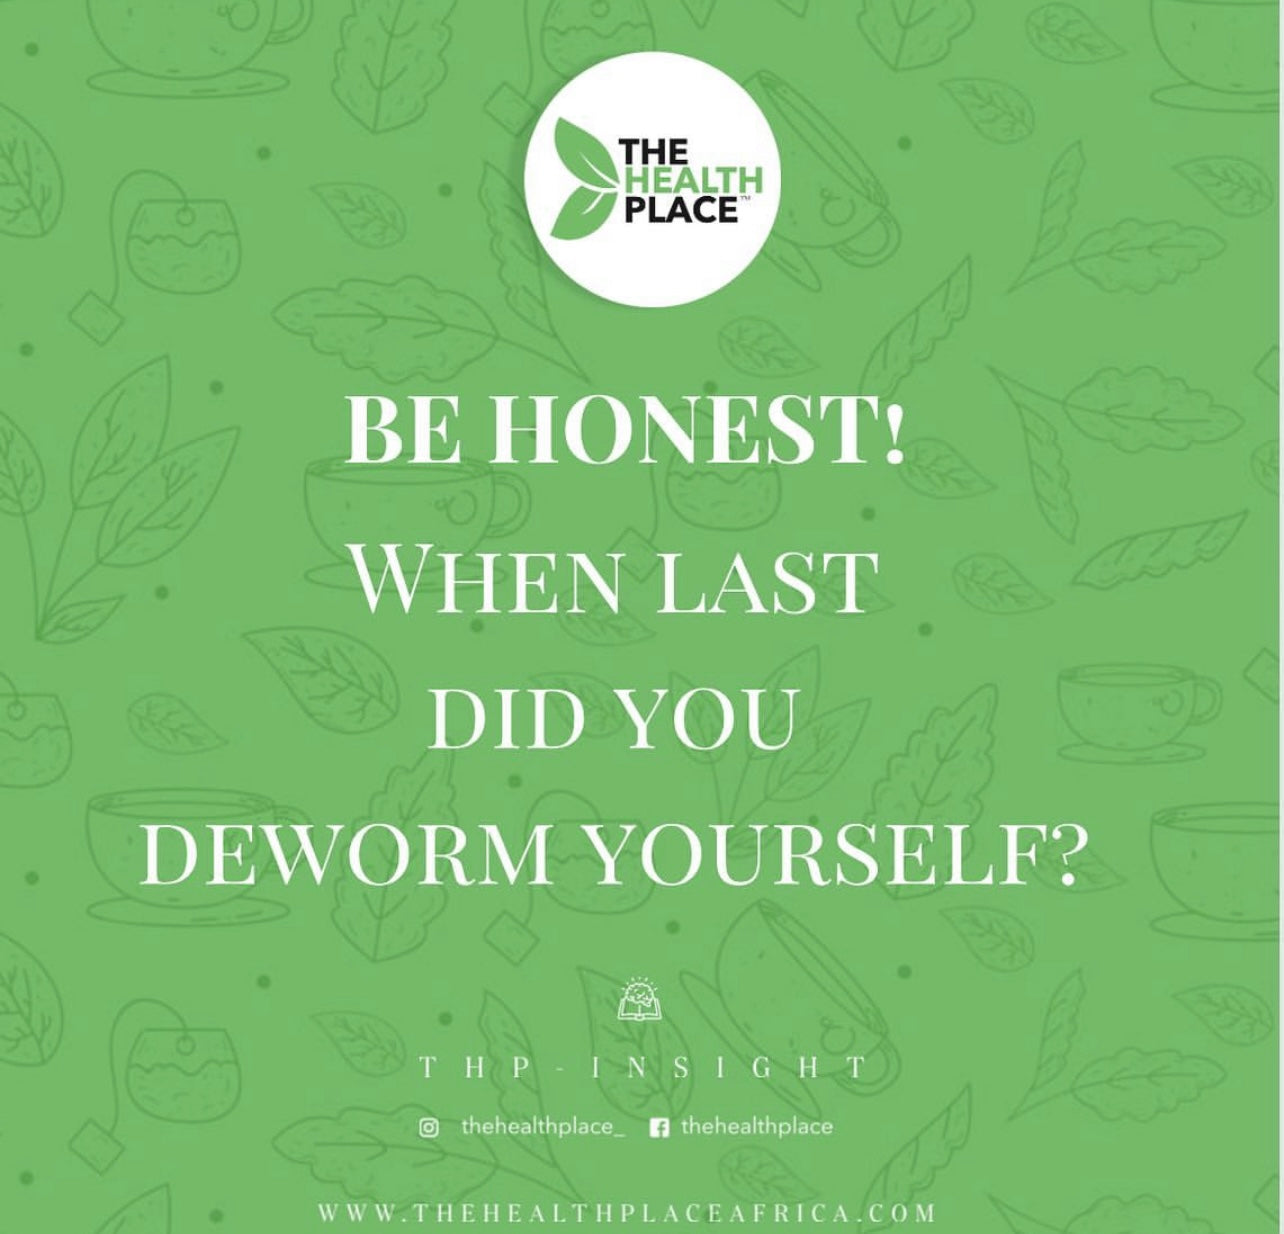 BE HONEST- WHEN LAST DID YOU DEWORM YOURSELF?